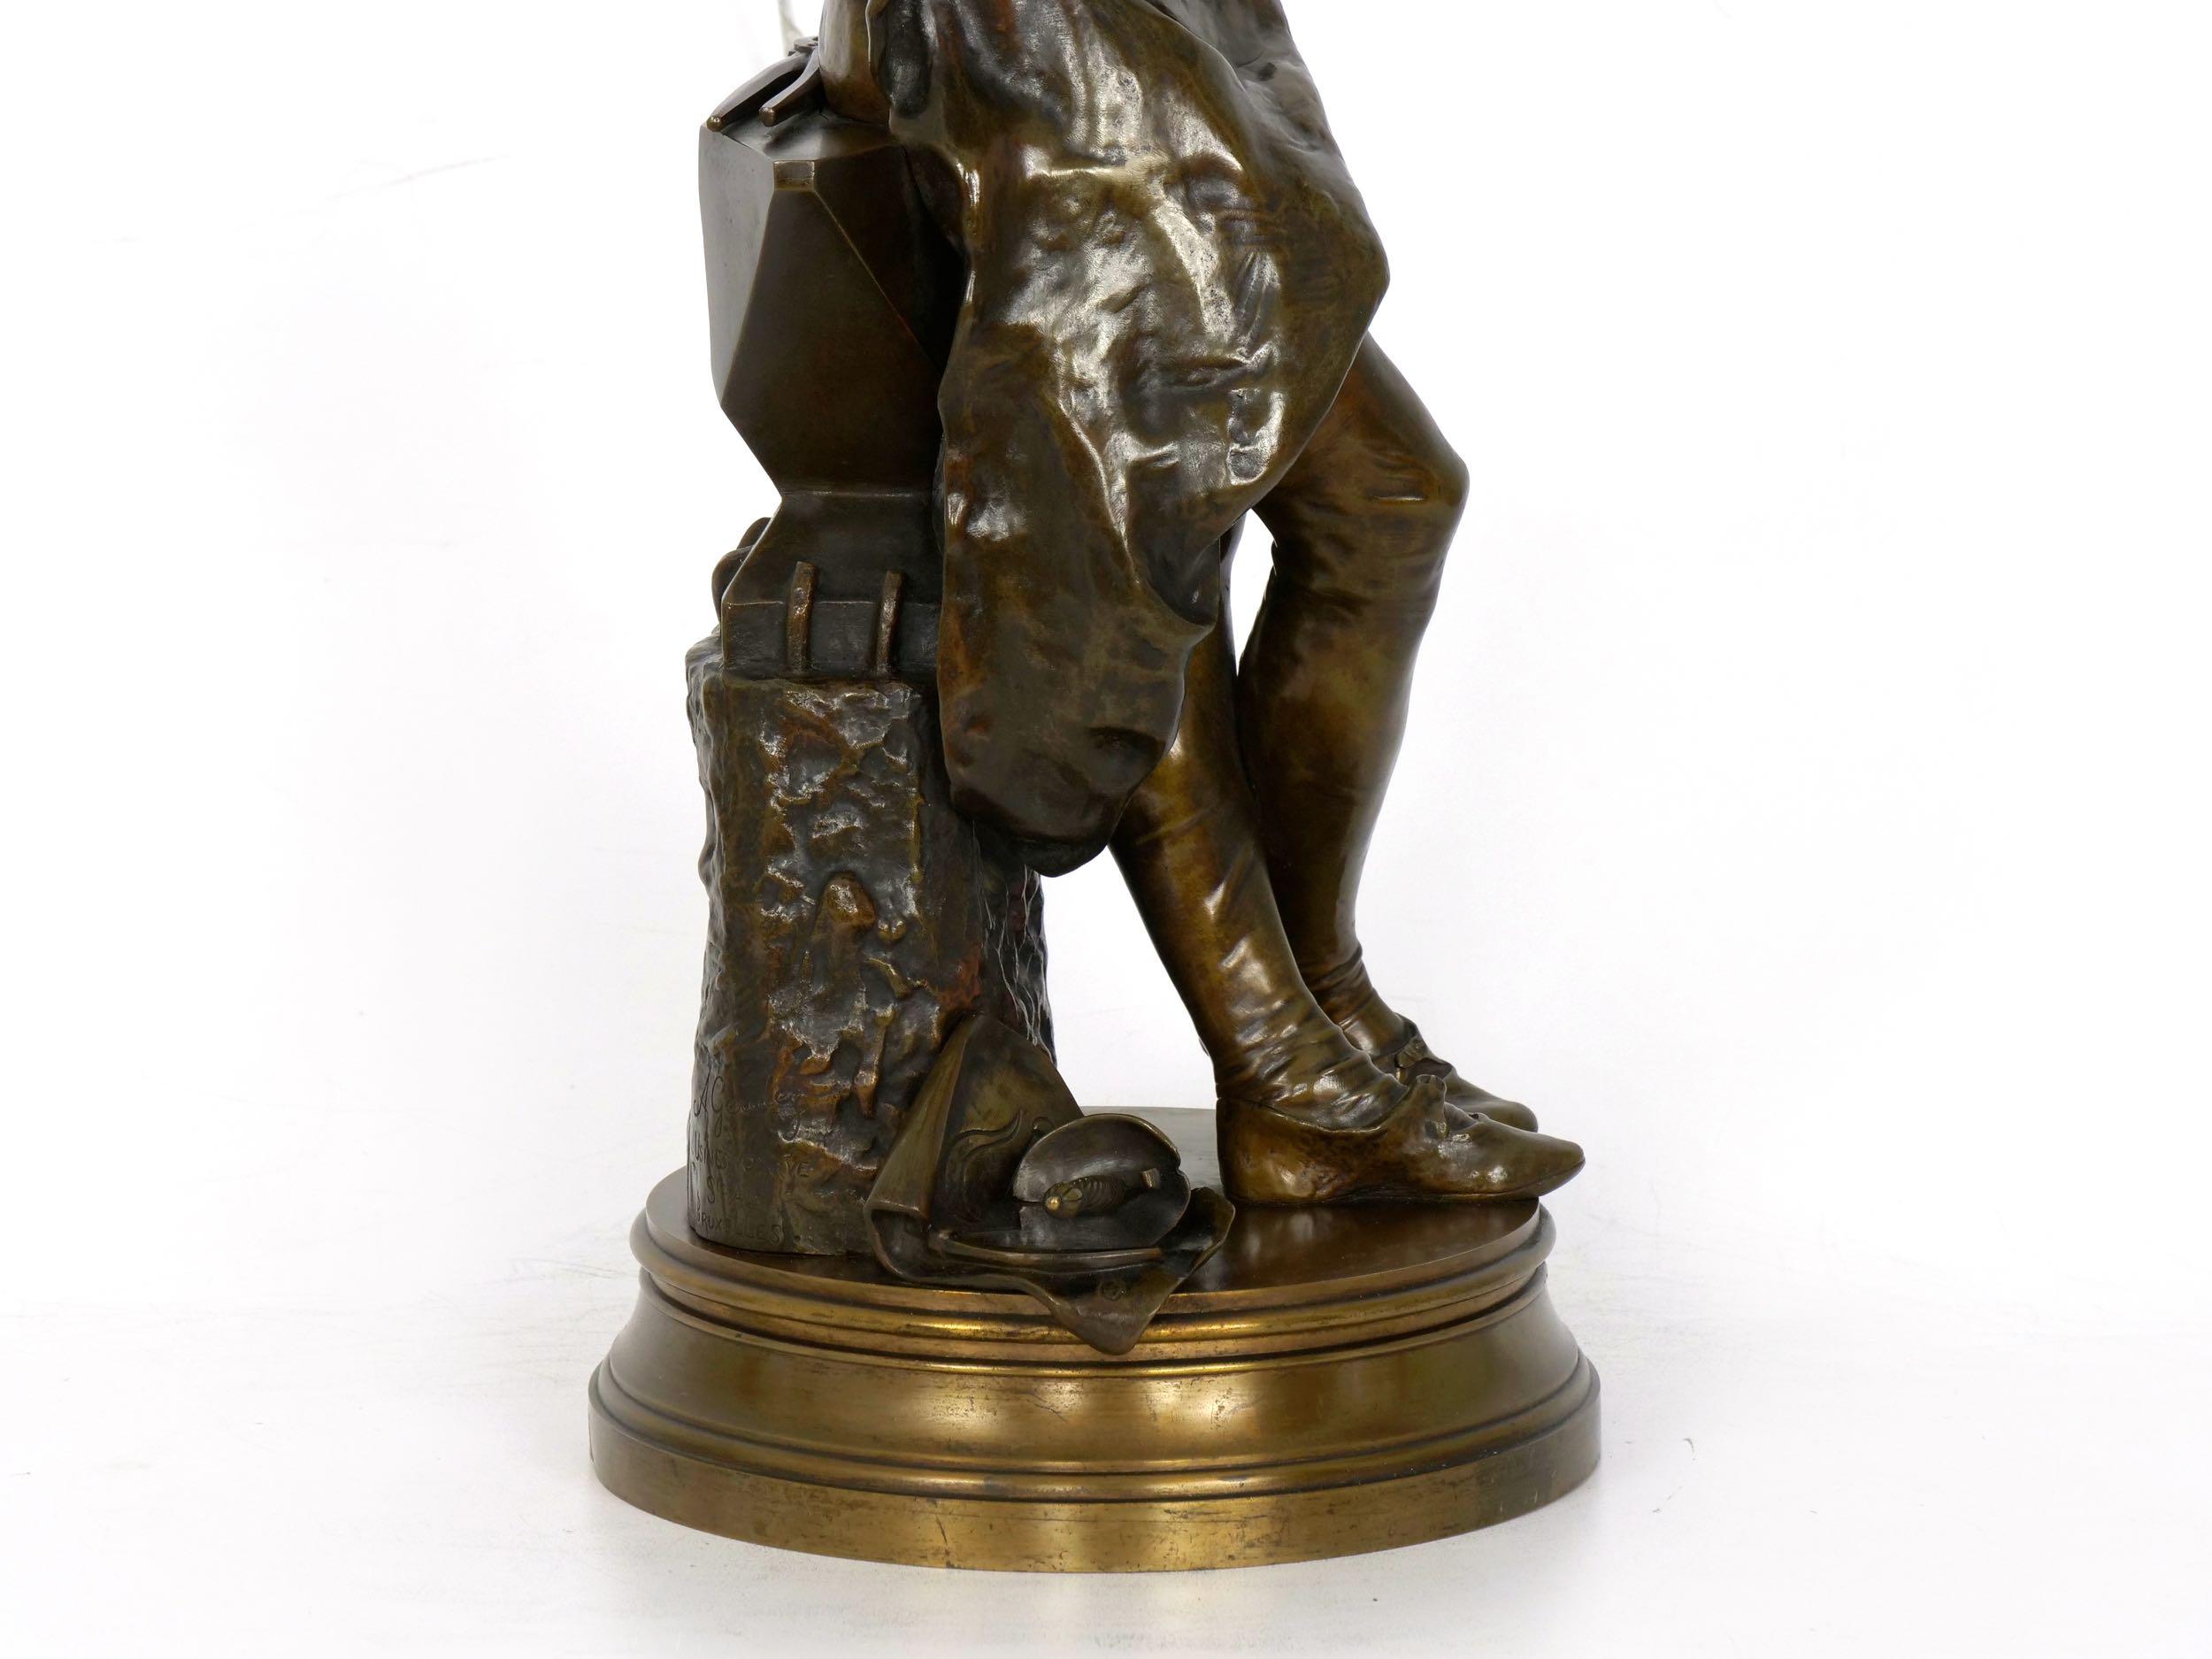 “A Young Bladesmith” French Antique Bronze Sculpture by Adrien-Étienne Gaudez 14